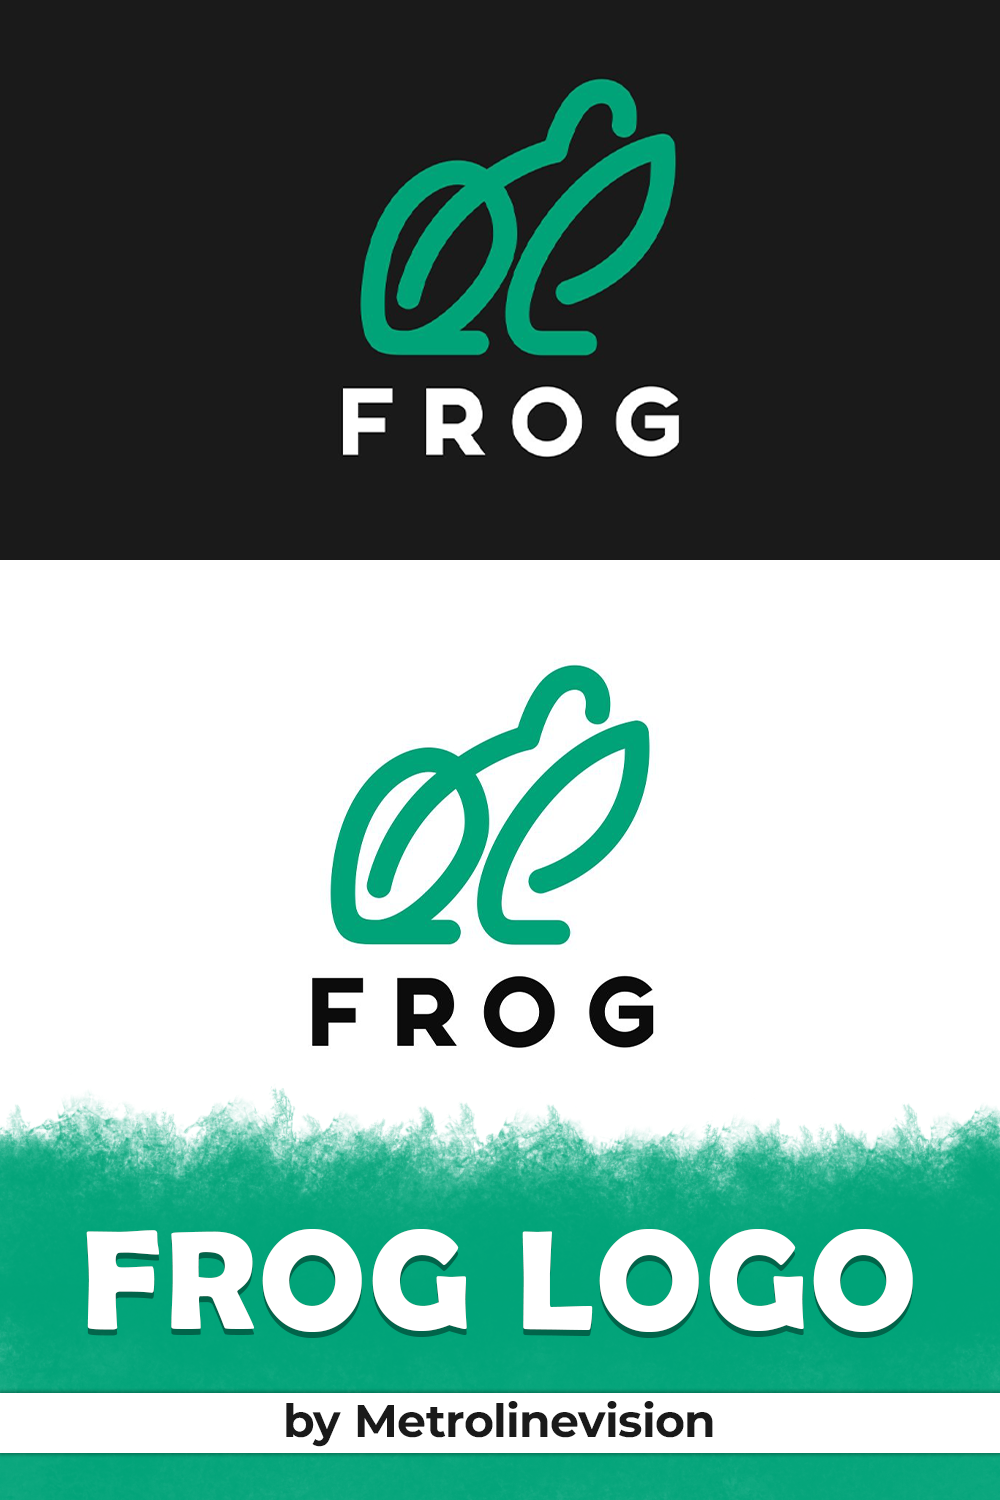 Two options of frog logo.